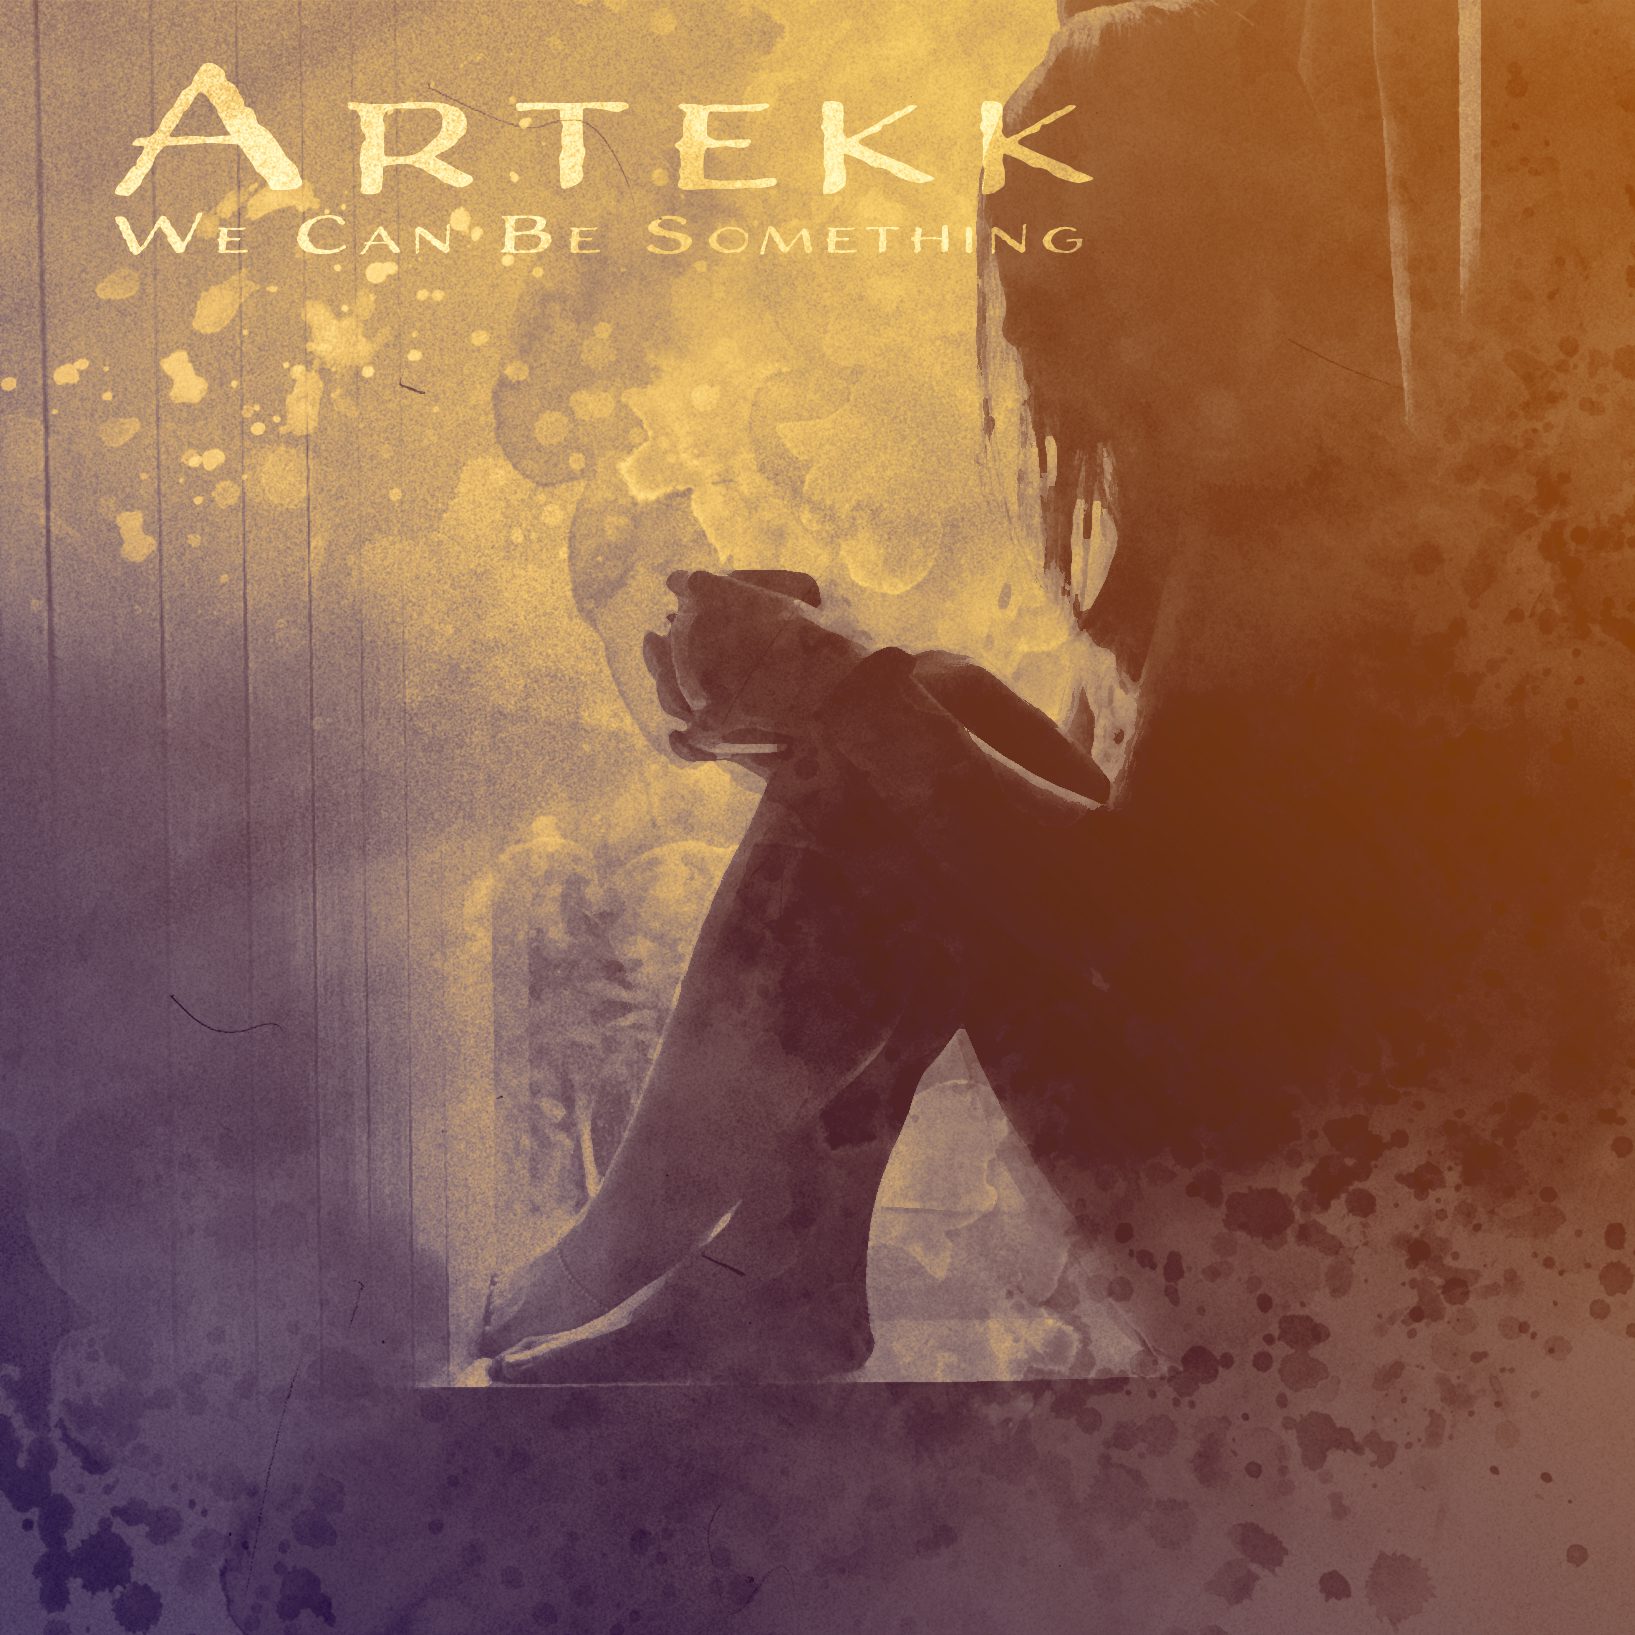 "We Can Be Something" full-length new album release by ARTEKK Release on 29th of July 2022